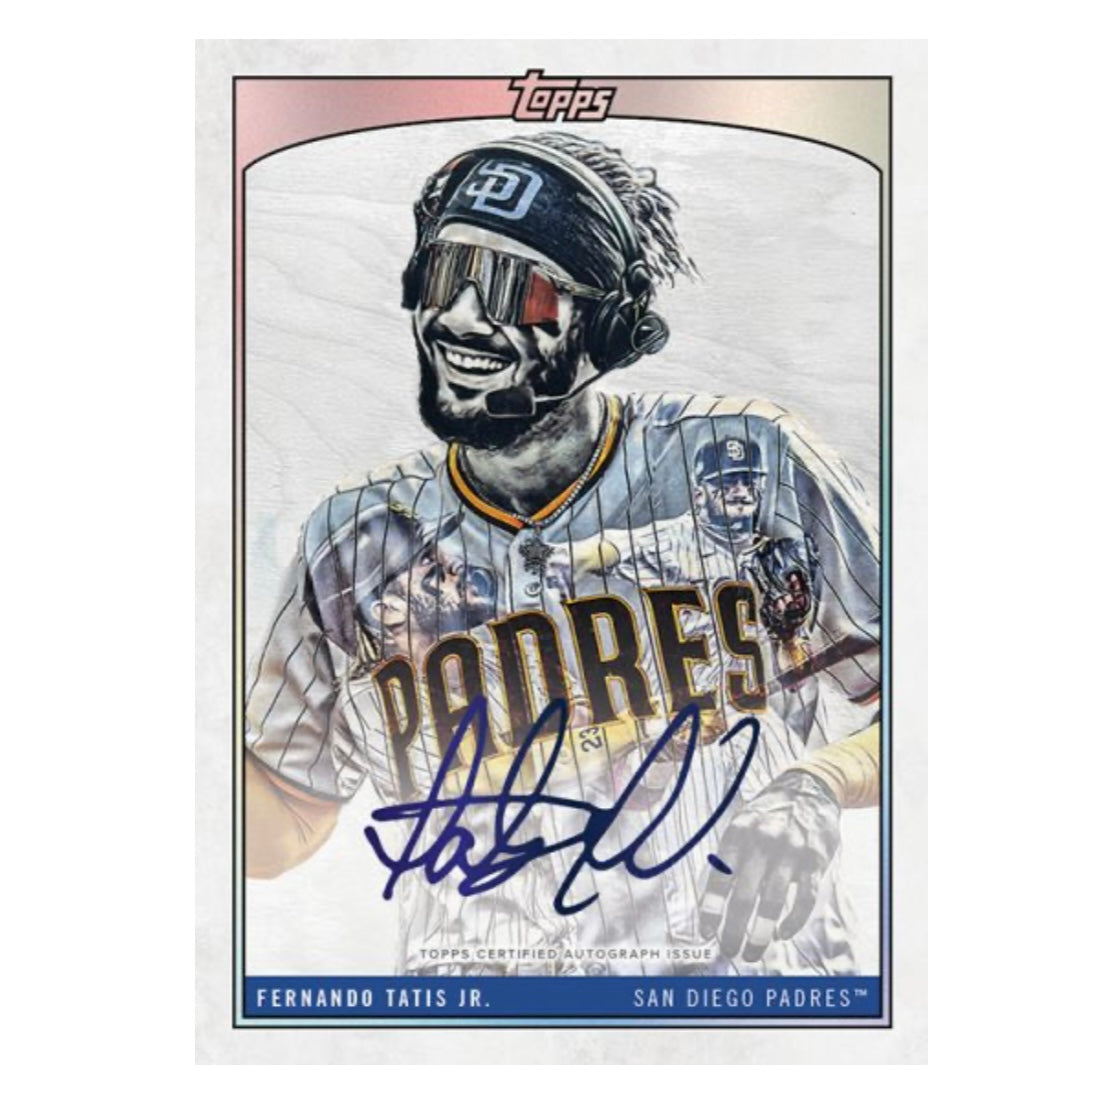 2019 Topps Certified Autograph Issued Juan Soto Signed Jersey Baseball Card